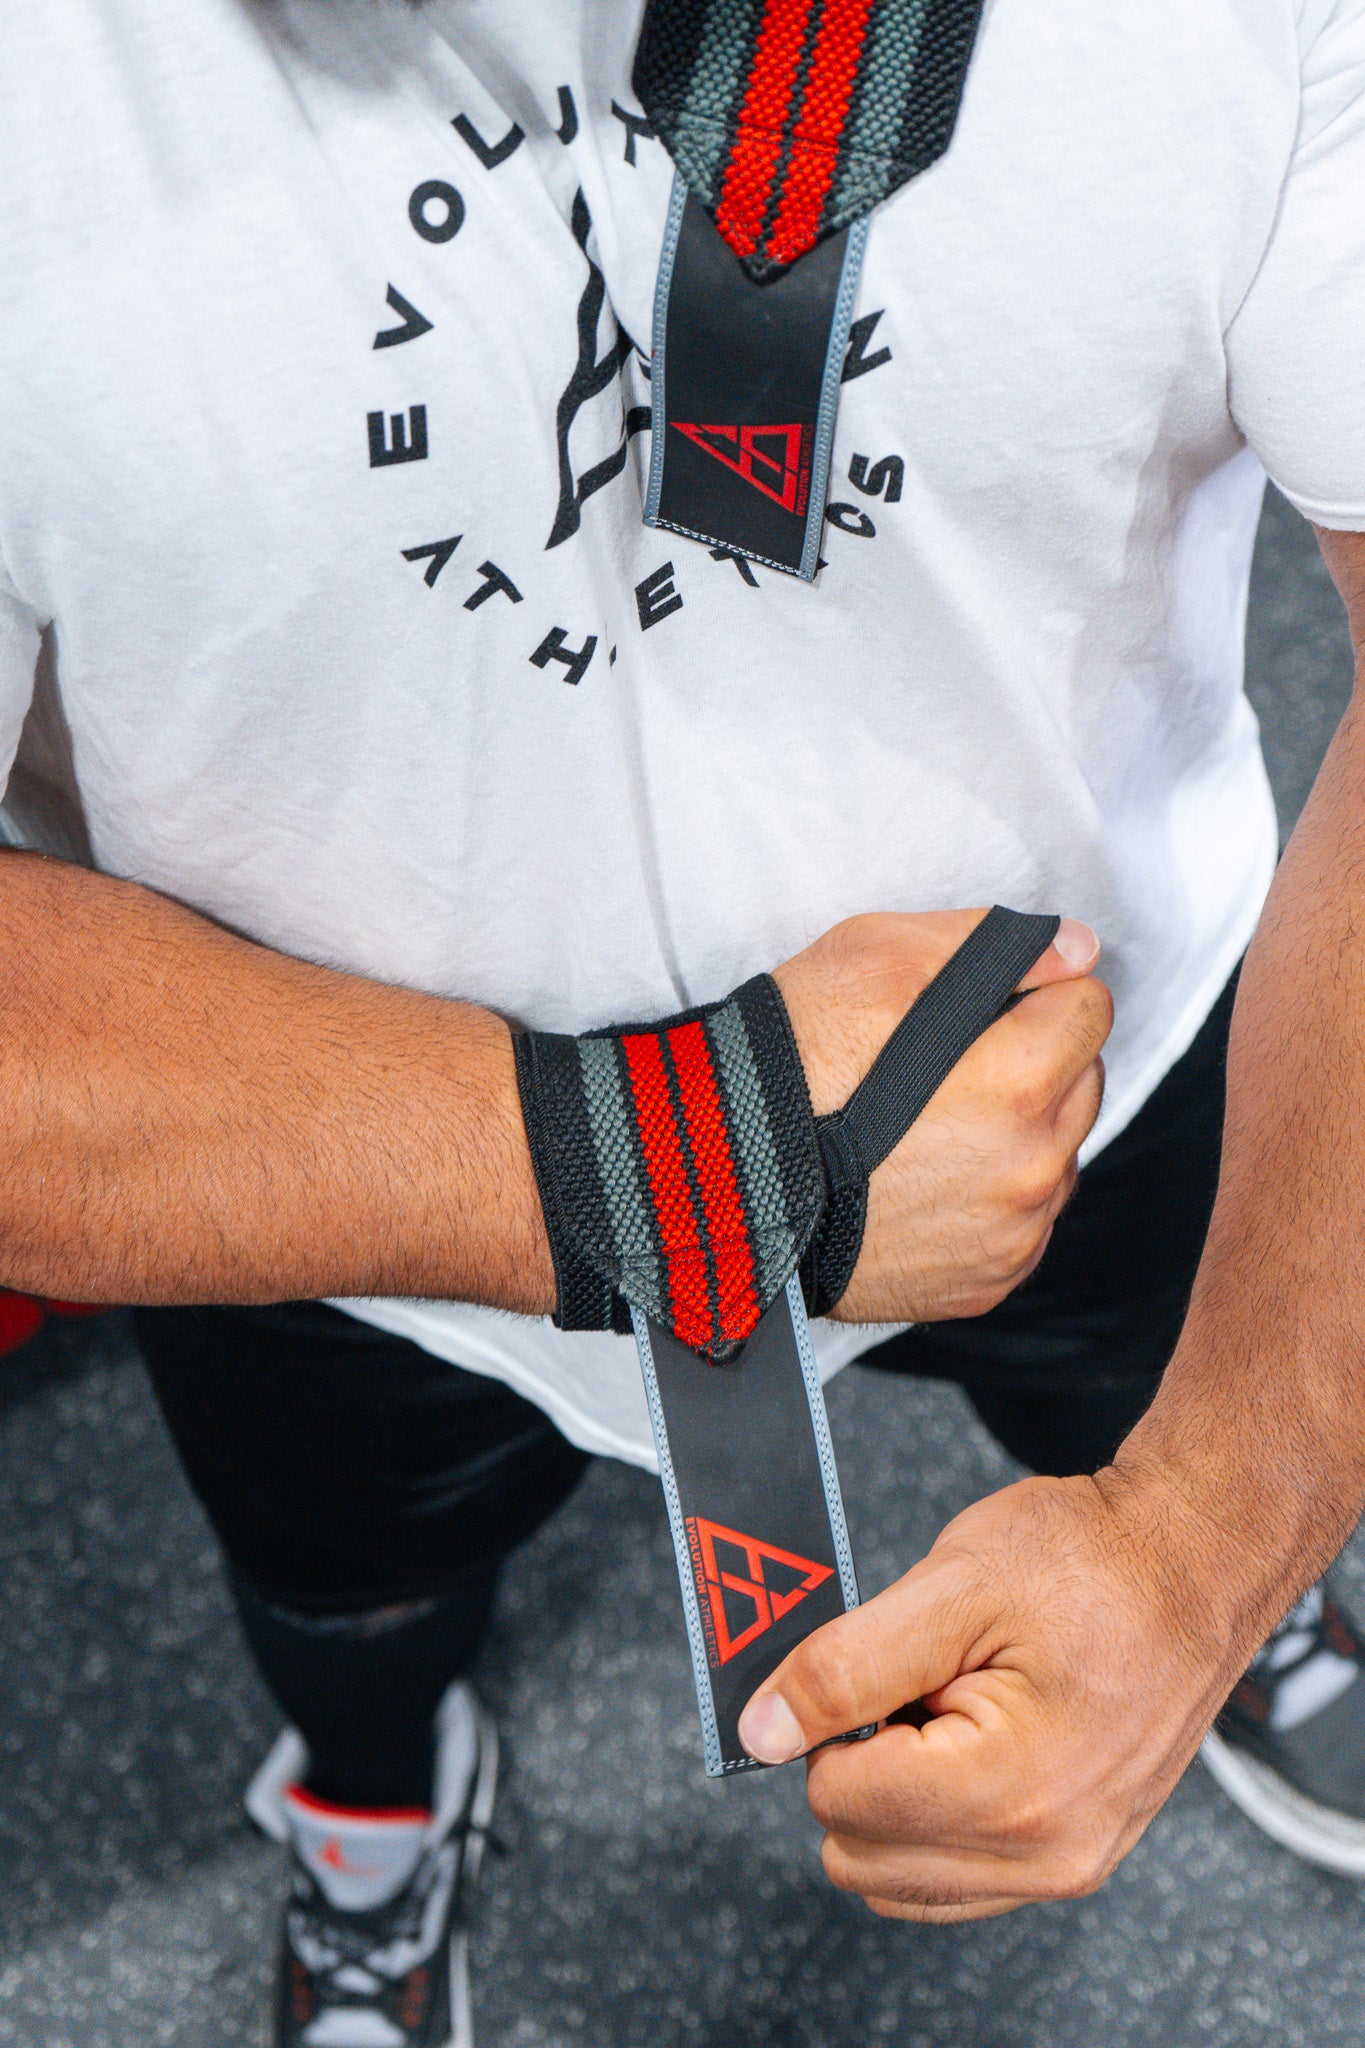 LIMITED ED. STRONGEST MAN ON EARTH WRIST WRAPS 20"